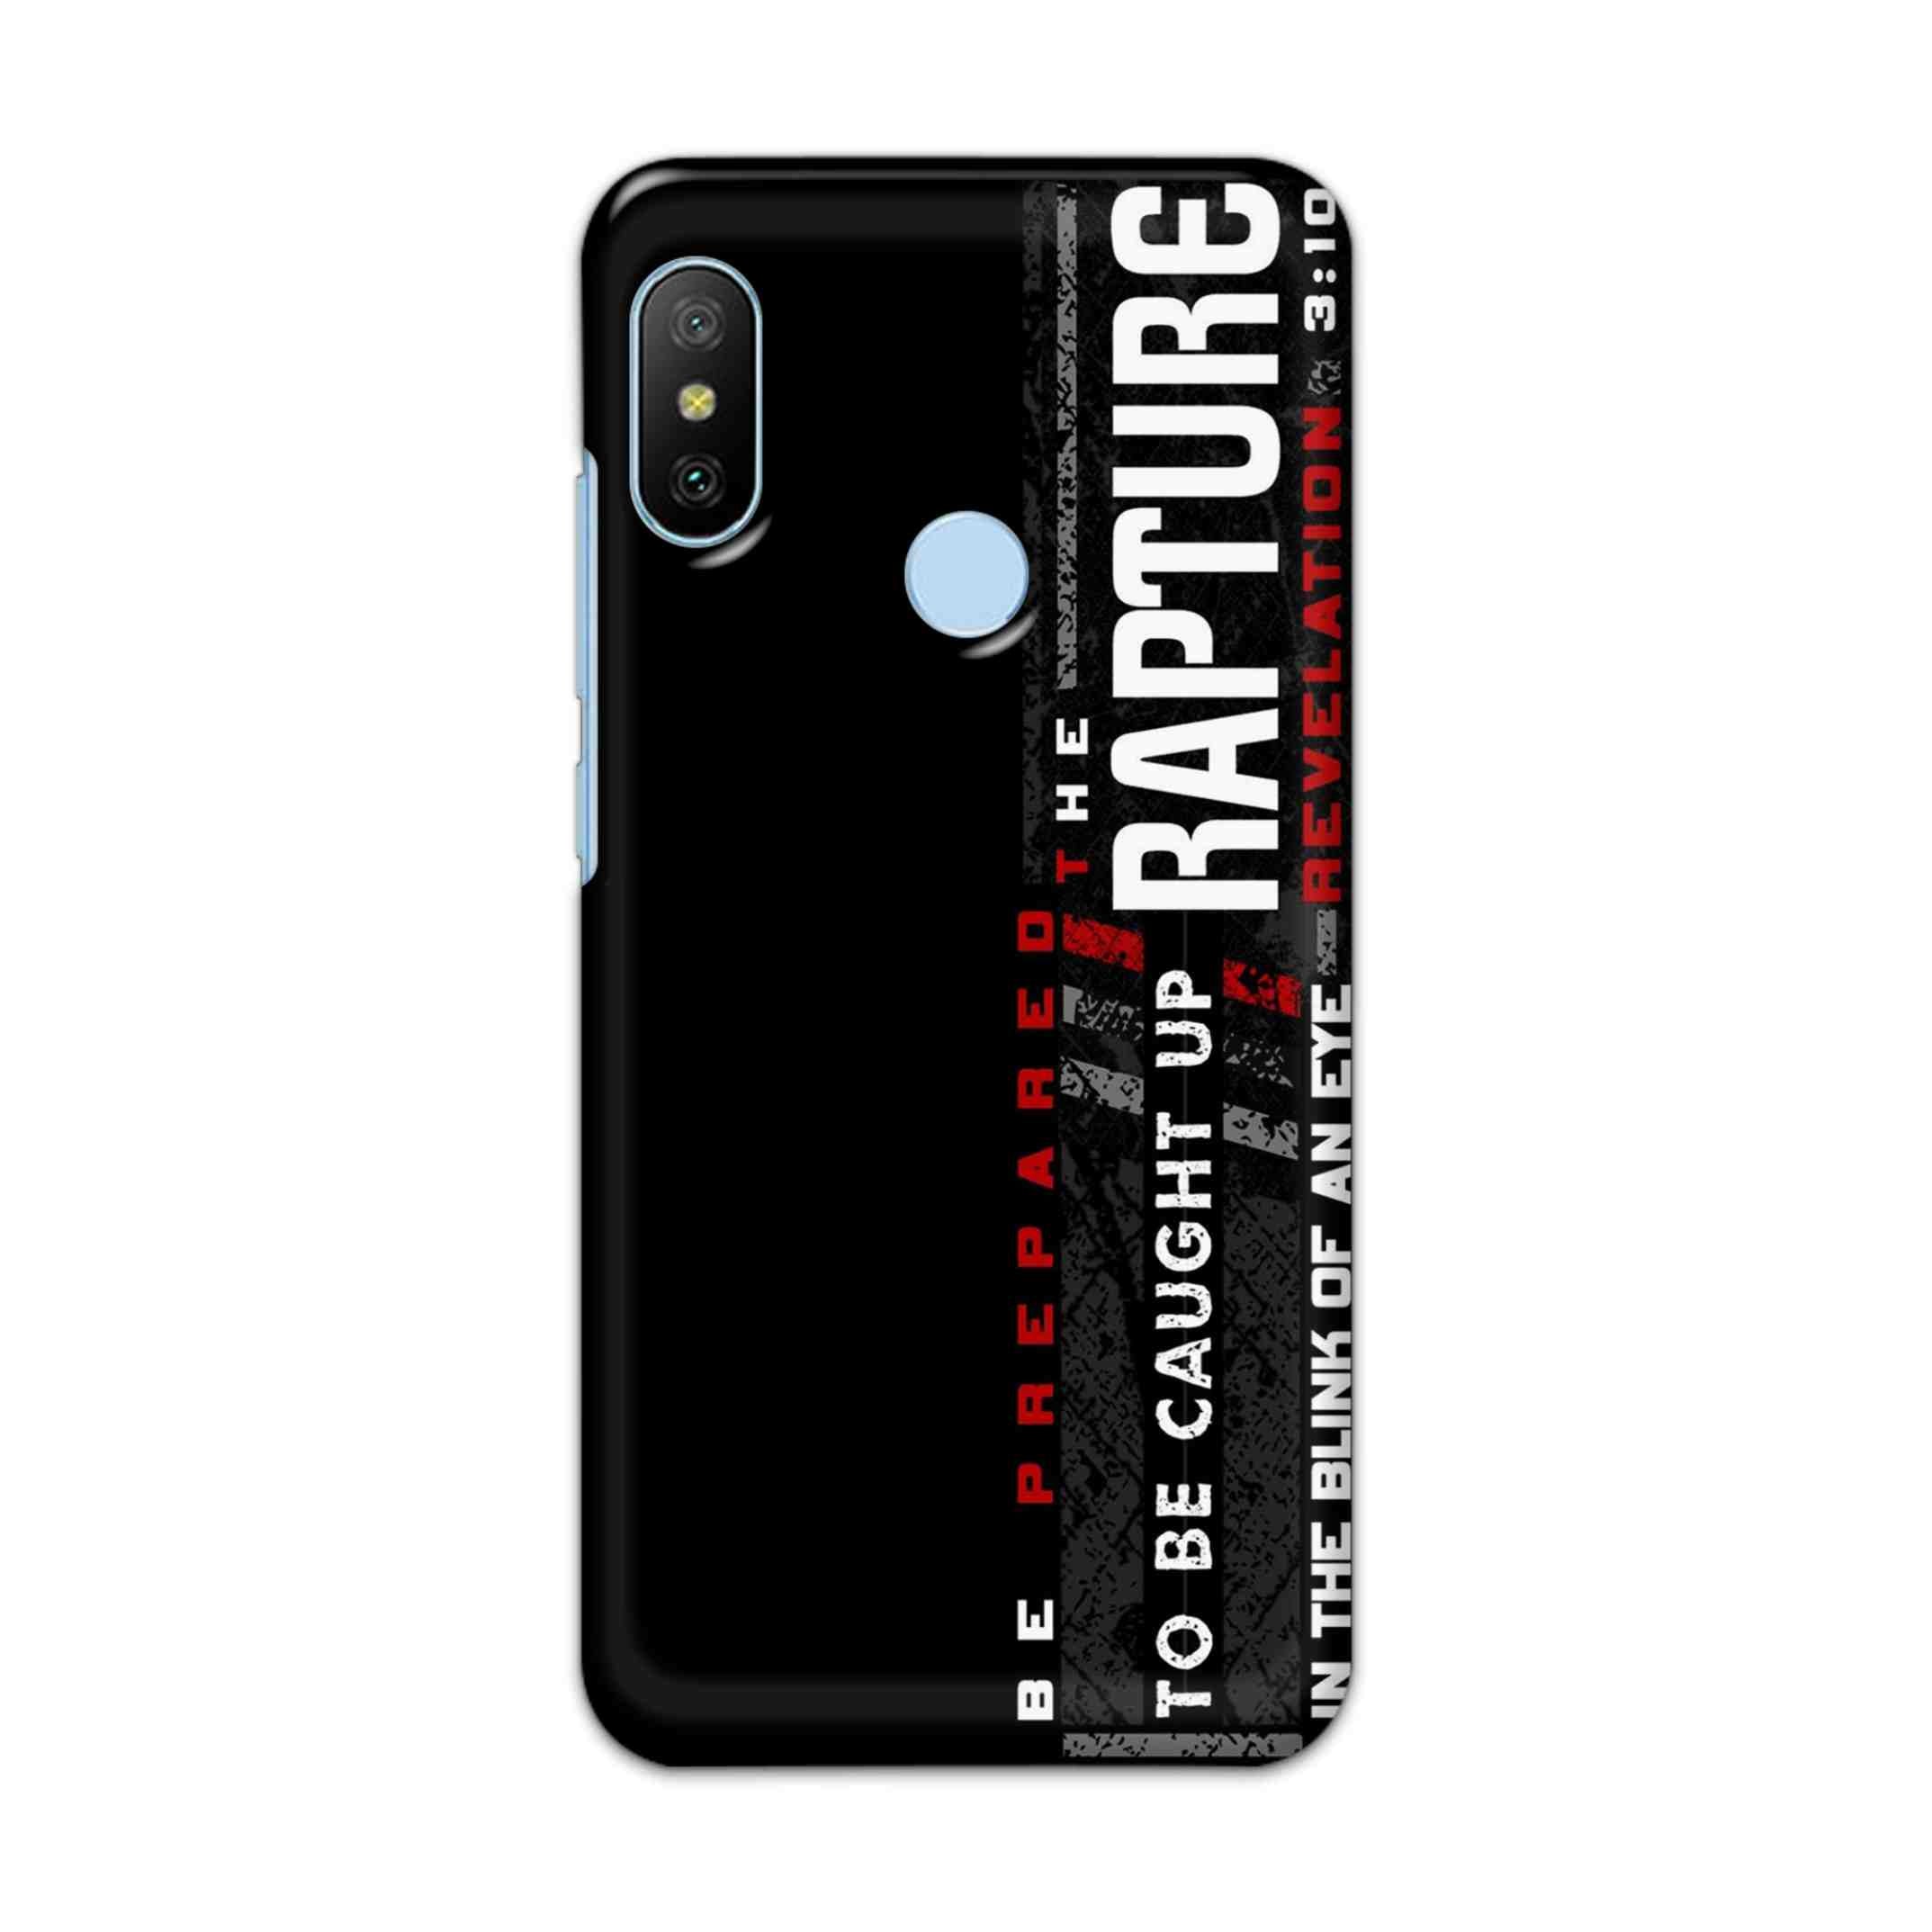 Buy Rapture Hard Back Mobile Phone Case/Cover For Xiaomi Redmi 6 Pro Online